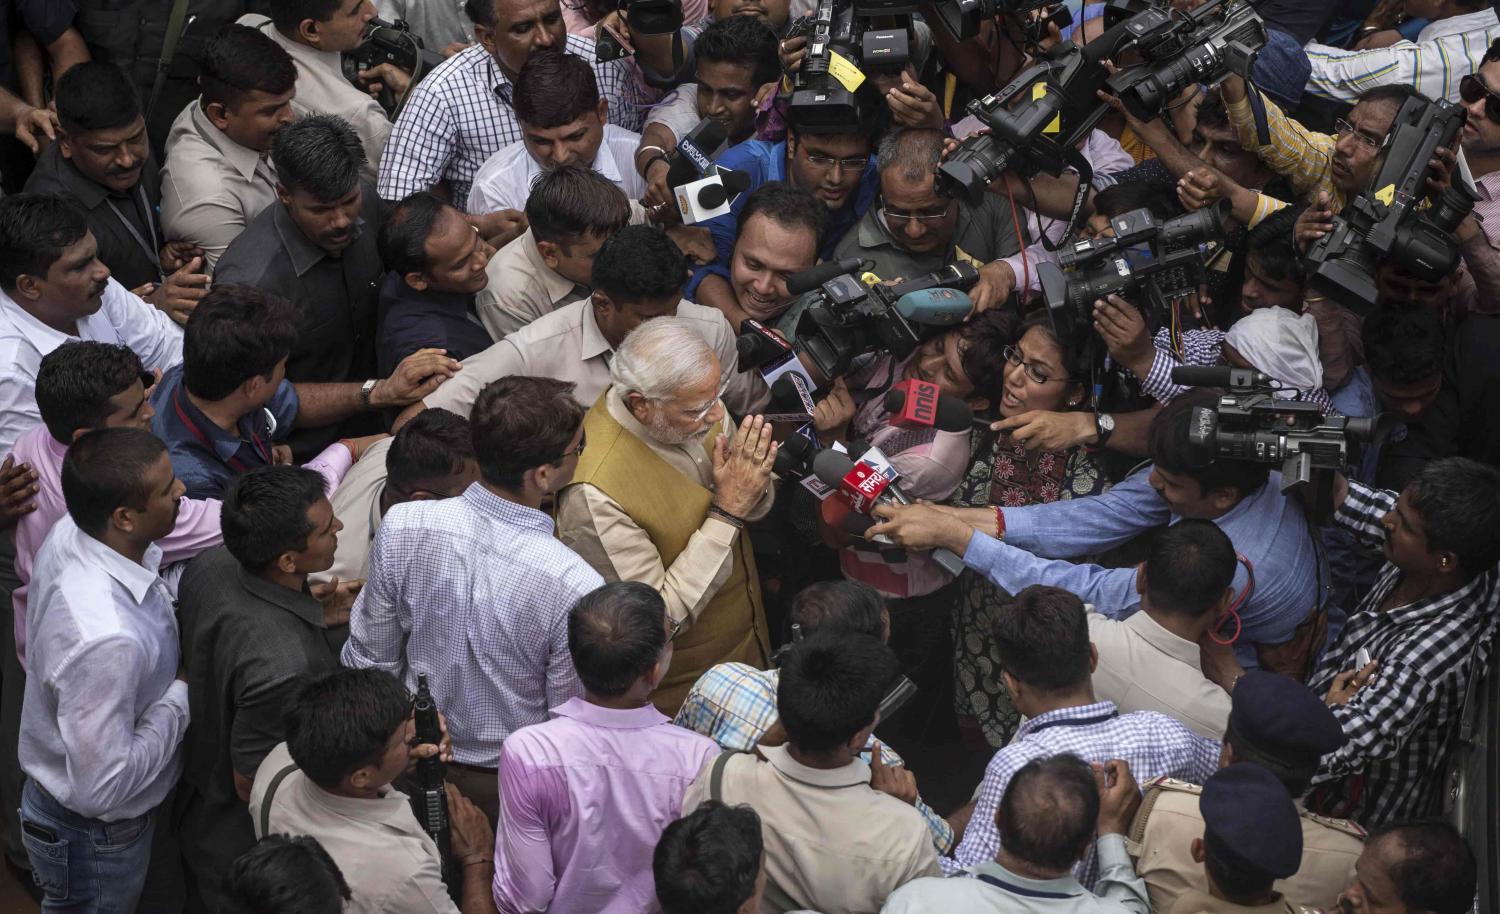 India's Narendra Modi mobbed in a press pack (Photo: Kevin Frayer/Getty)